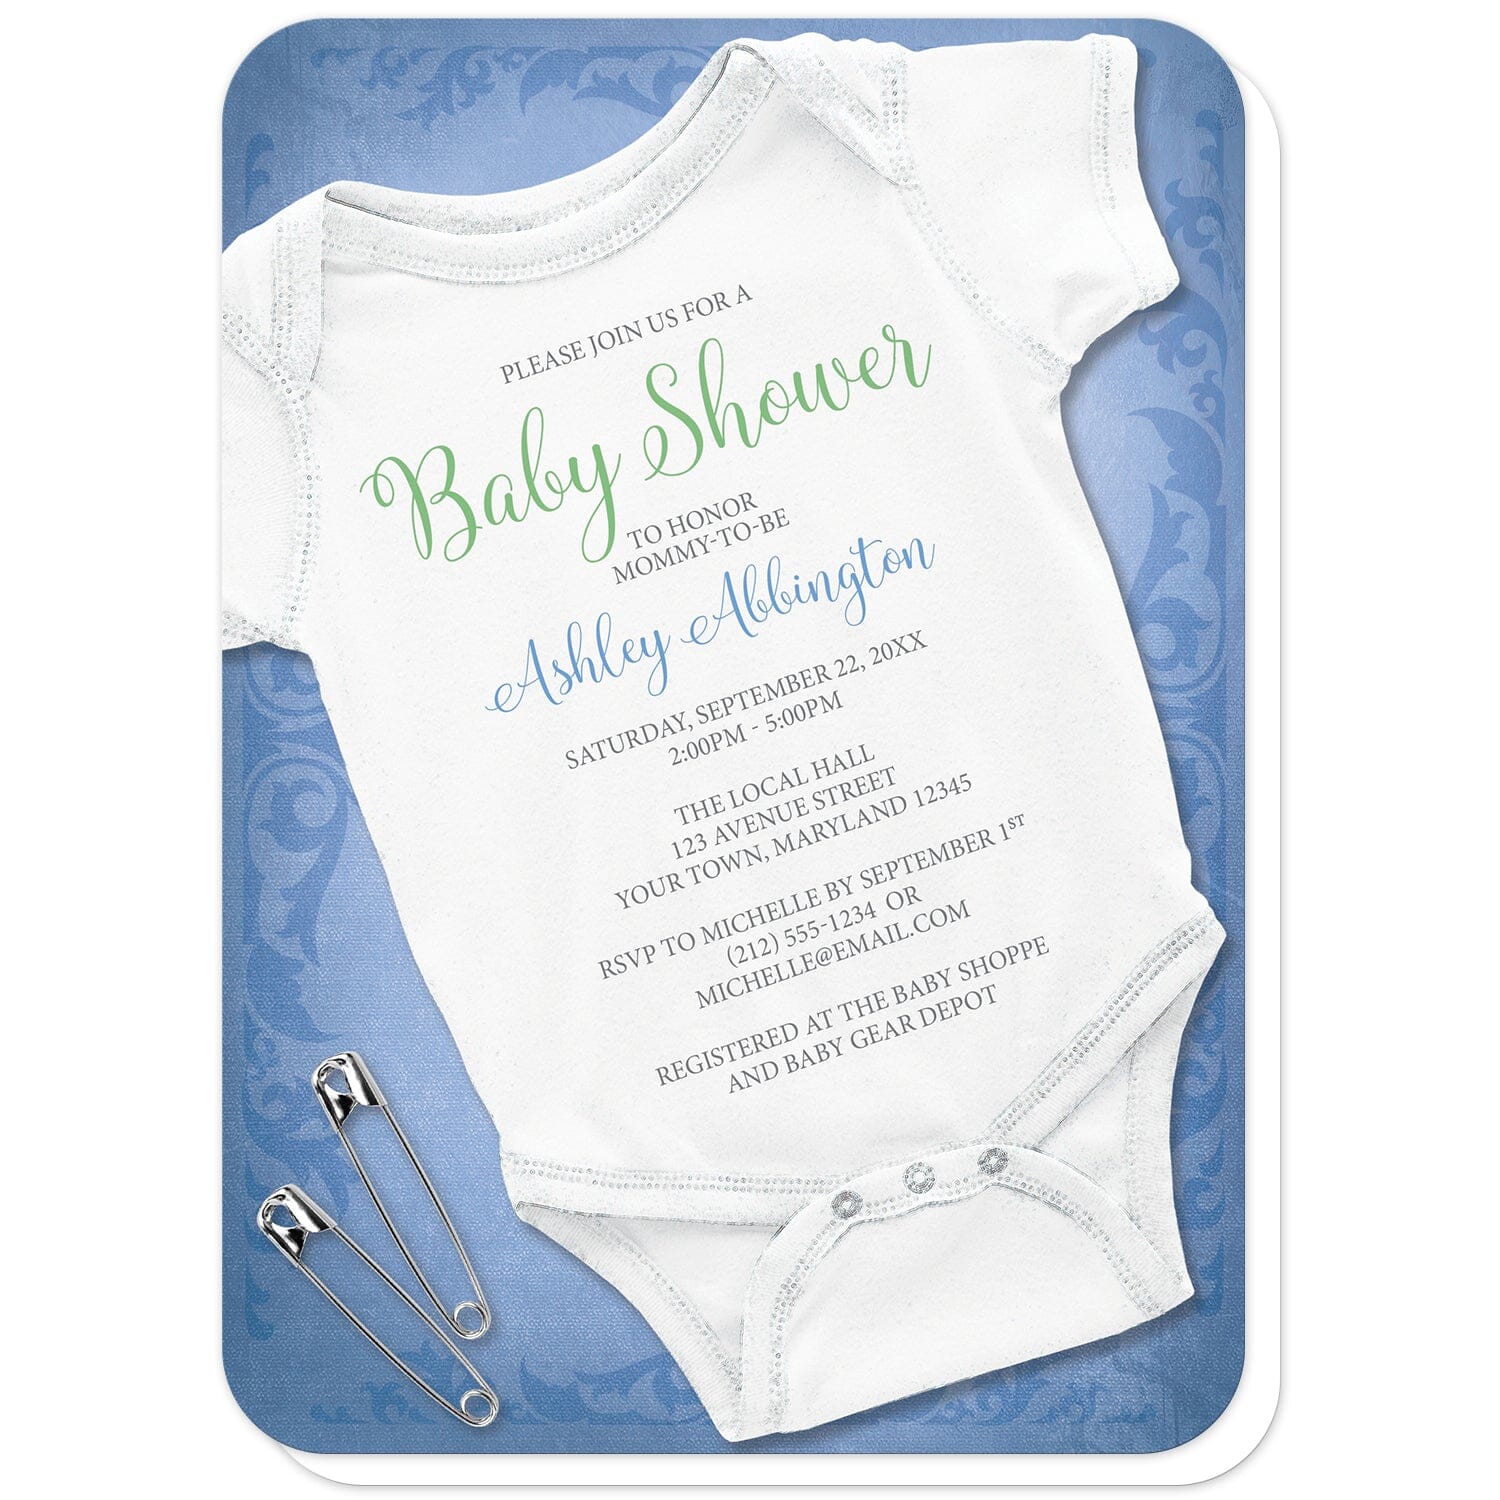 Baby Bodysuit and Safety Pins Blue Baby Shower Invitations (with rounded corners) at Artistically Invited. Baby bodysuit and safety pins blue baby shower invitations for the mommy-to-be designed with a white infant bodysuit and two safety pins to the side. These boy bodysuit baby shower invitations feature your personalized shower details custom printed in blue, green, and gray over the white infant bodysuit, over a uniquely detailed blue background design.